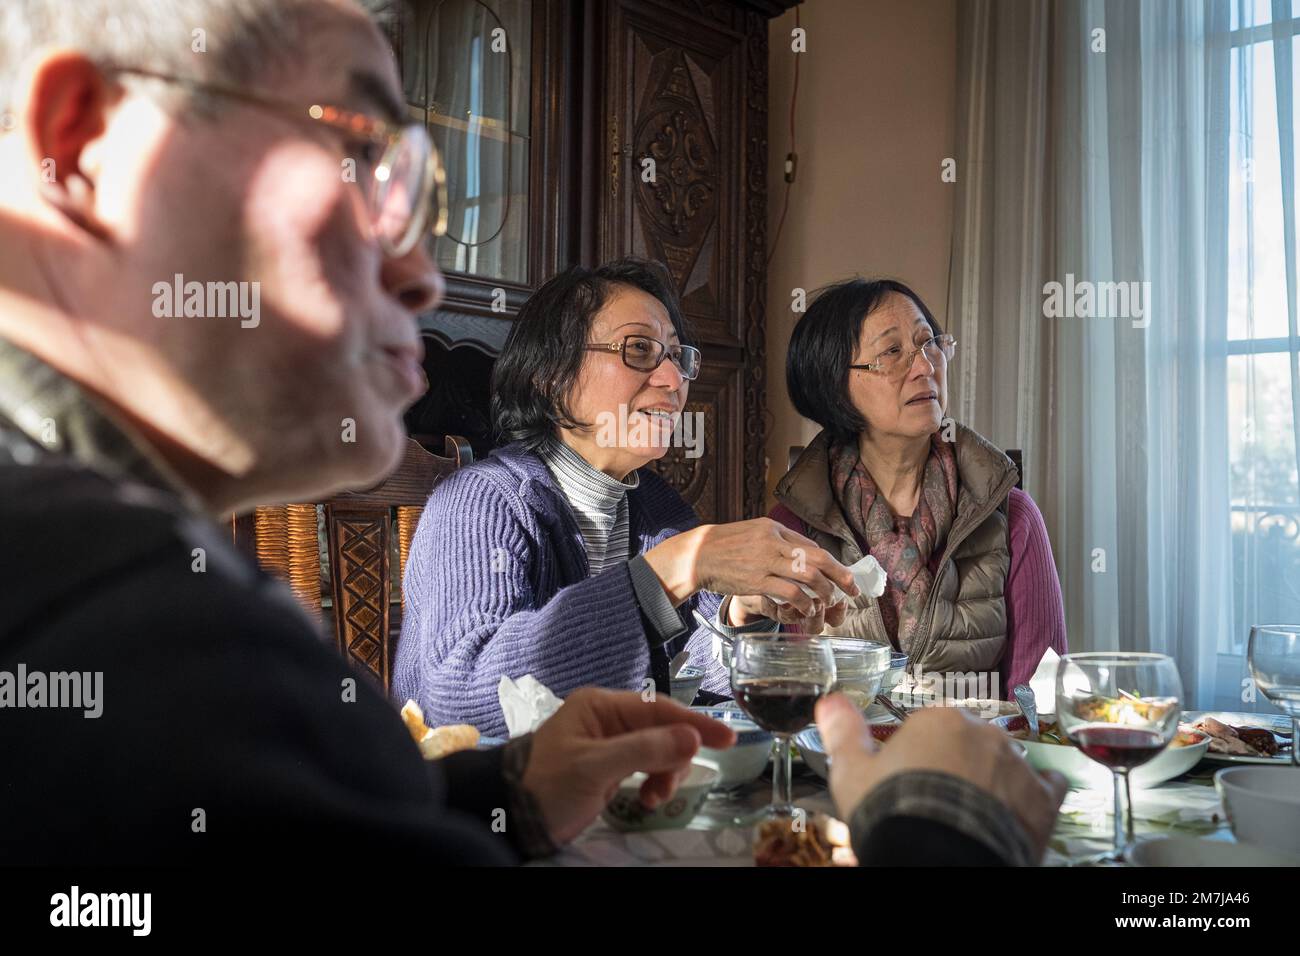 Olivier Donnars / Le Pictorium -  Tet, Vietnamese New Year -  7/2/2016  -  France / Ile-de-France (region)  -  Family and friends meal at Mr. and Mrs. Stock Photo